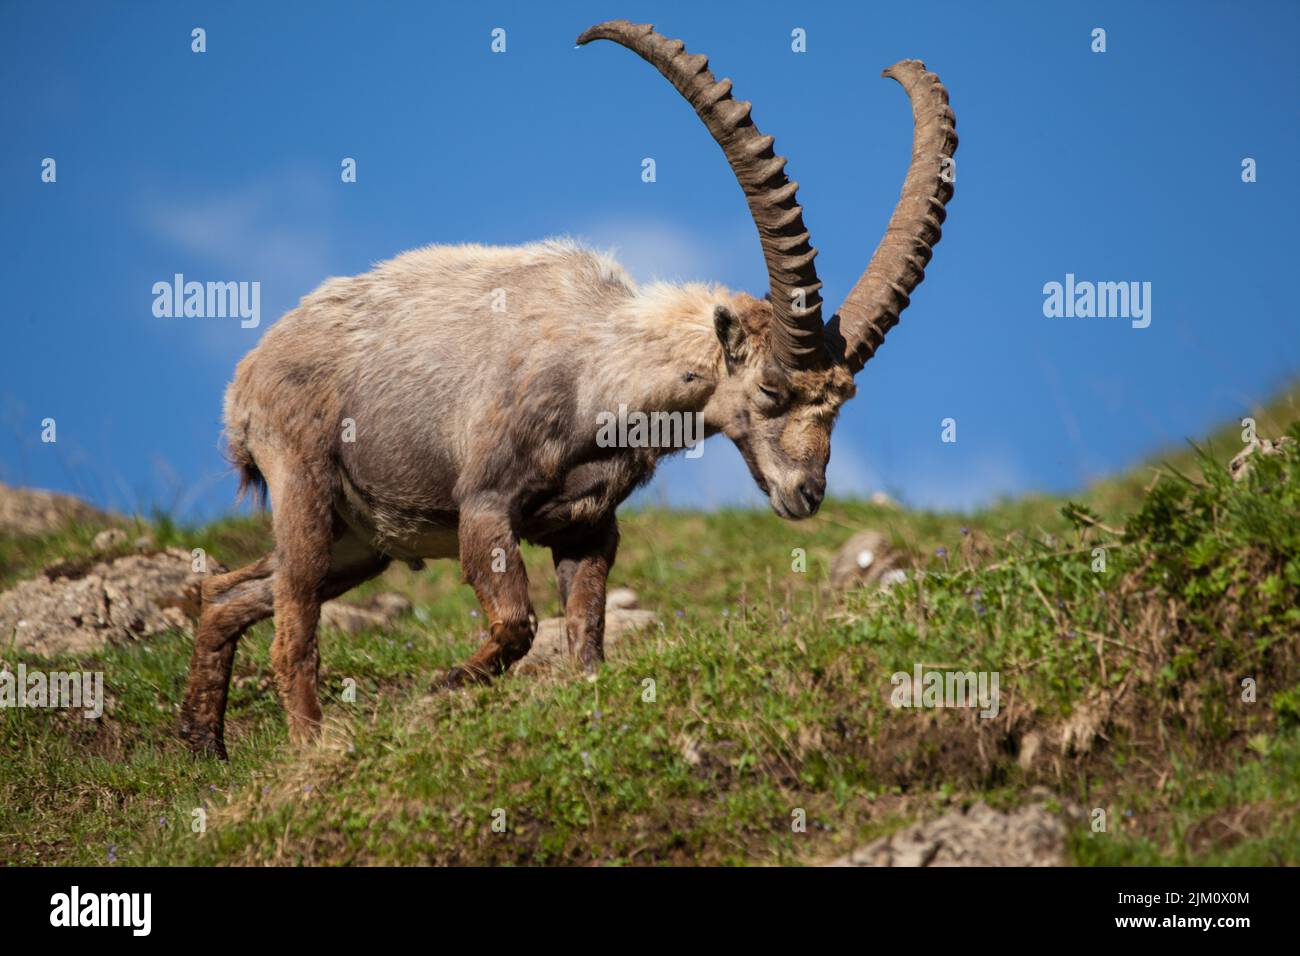 A wild mountain goat with long horns on a hill Stock Photo